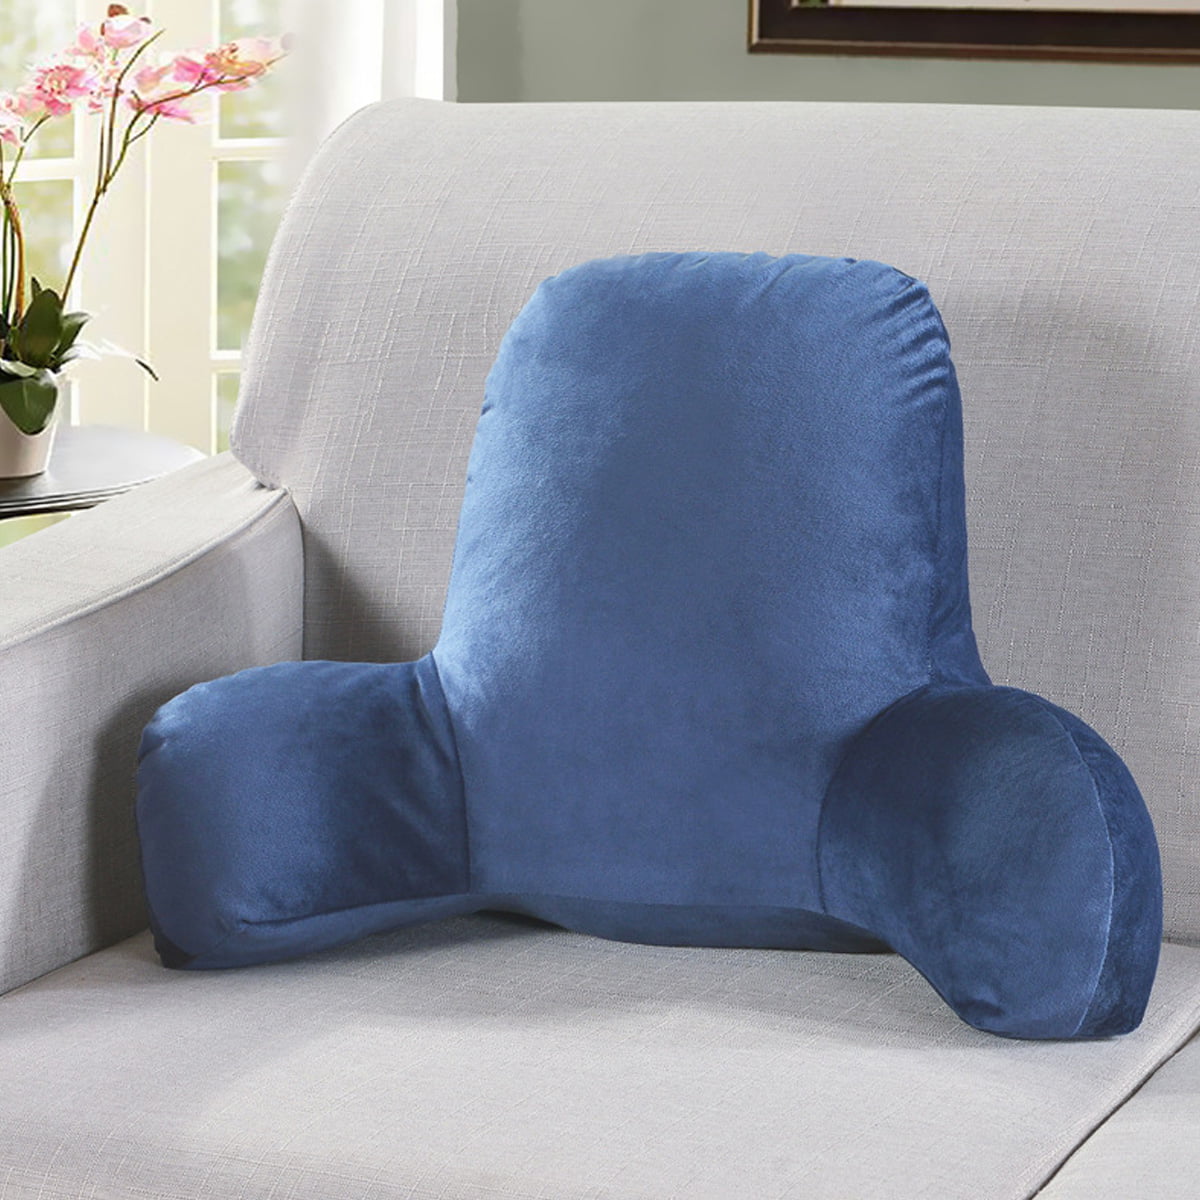 Backrest Pillow with Arms, Bed Rest Reading and Bedrest Lounge Sitting Support Pillow, Relief